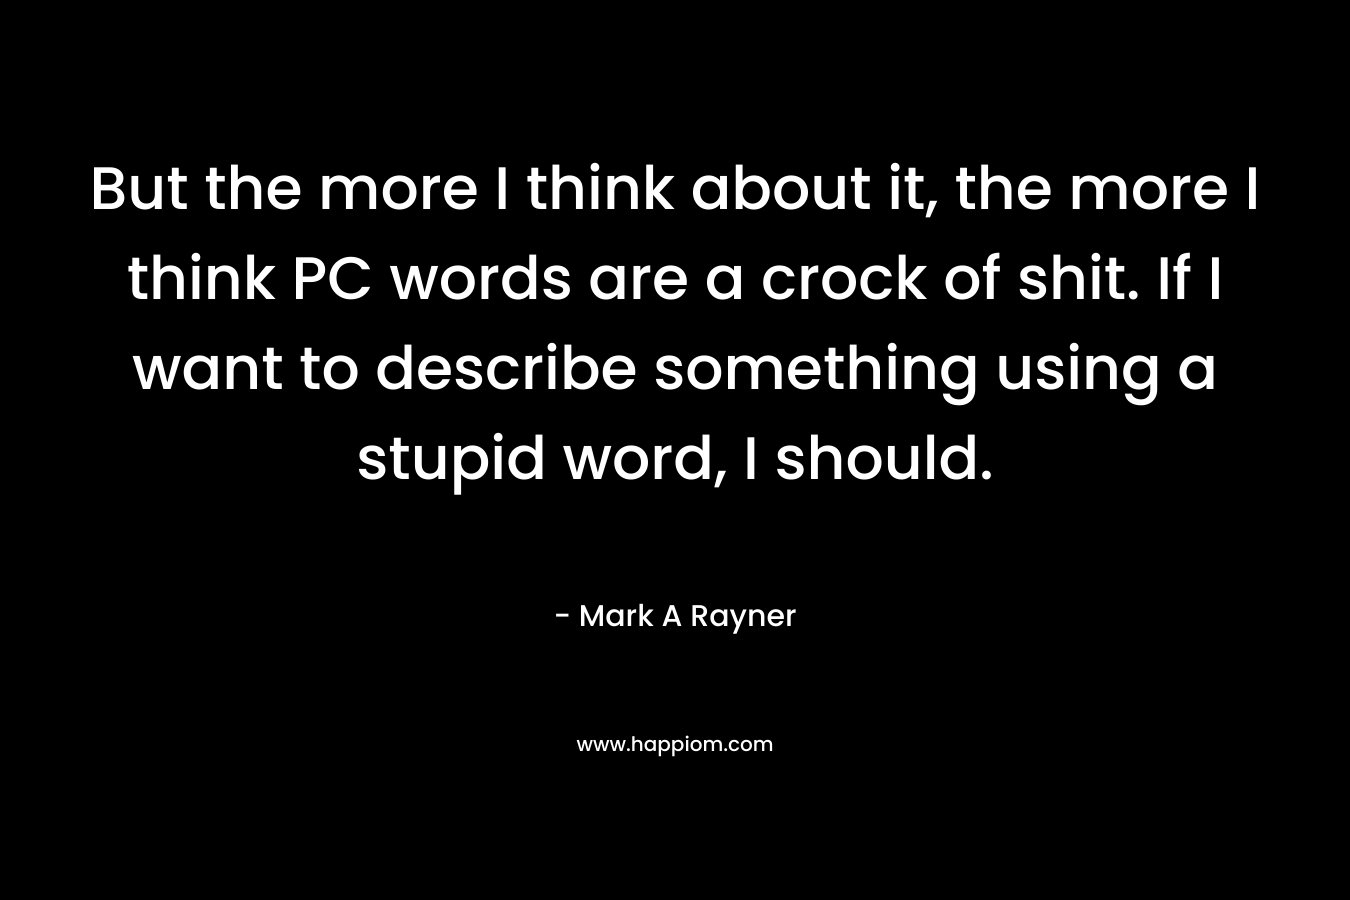 But the more I think about it, the more I think PC words are a crock of shit. If I want to describe something using a stupid word, I should. – Mark A Rayner